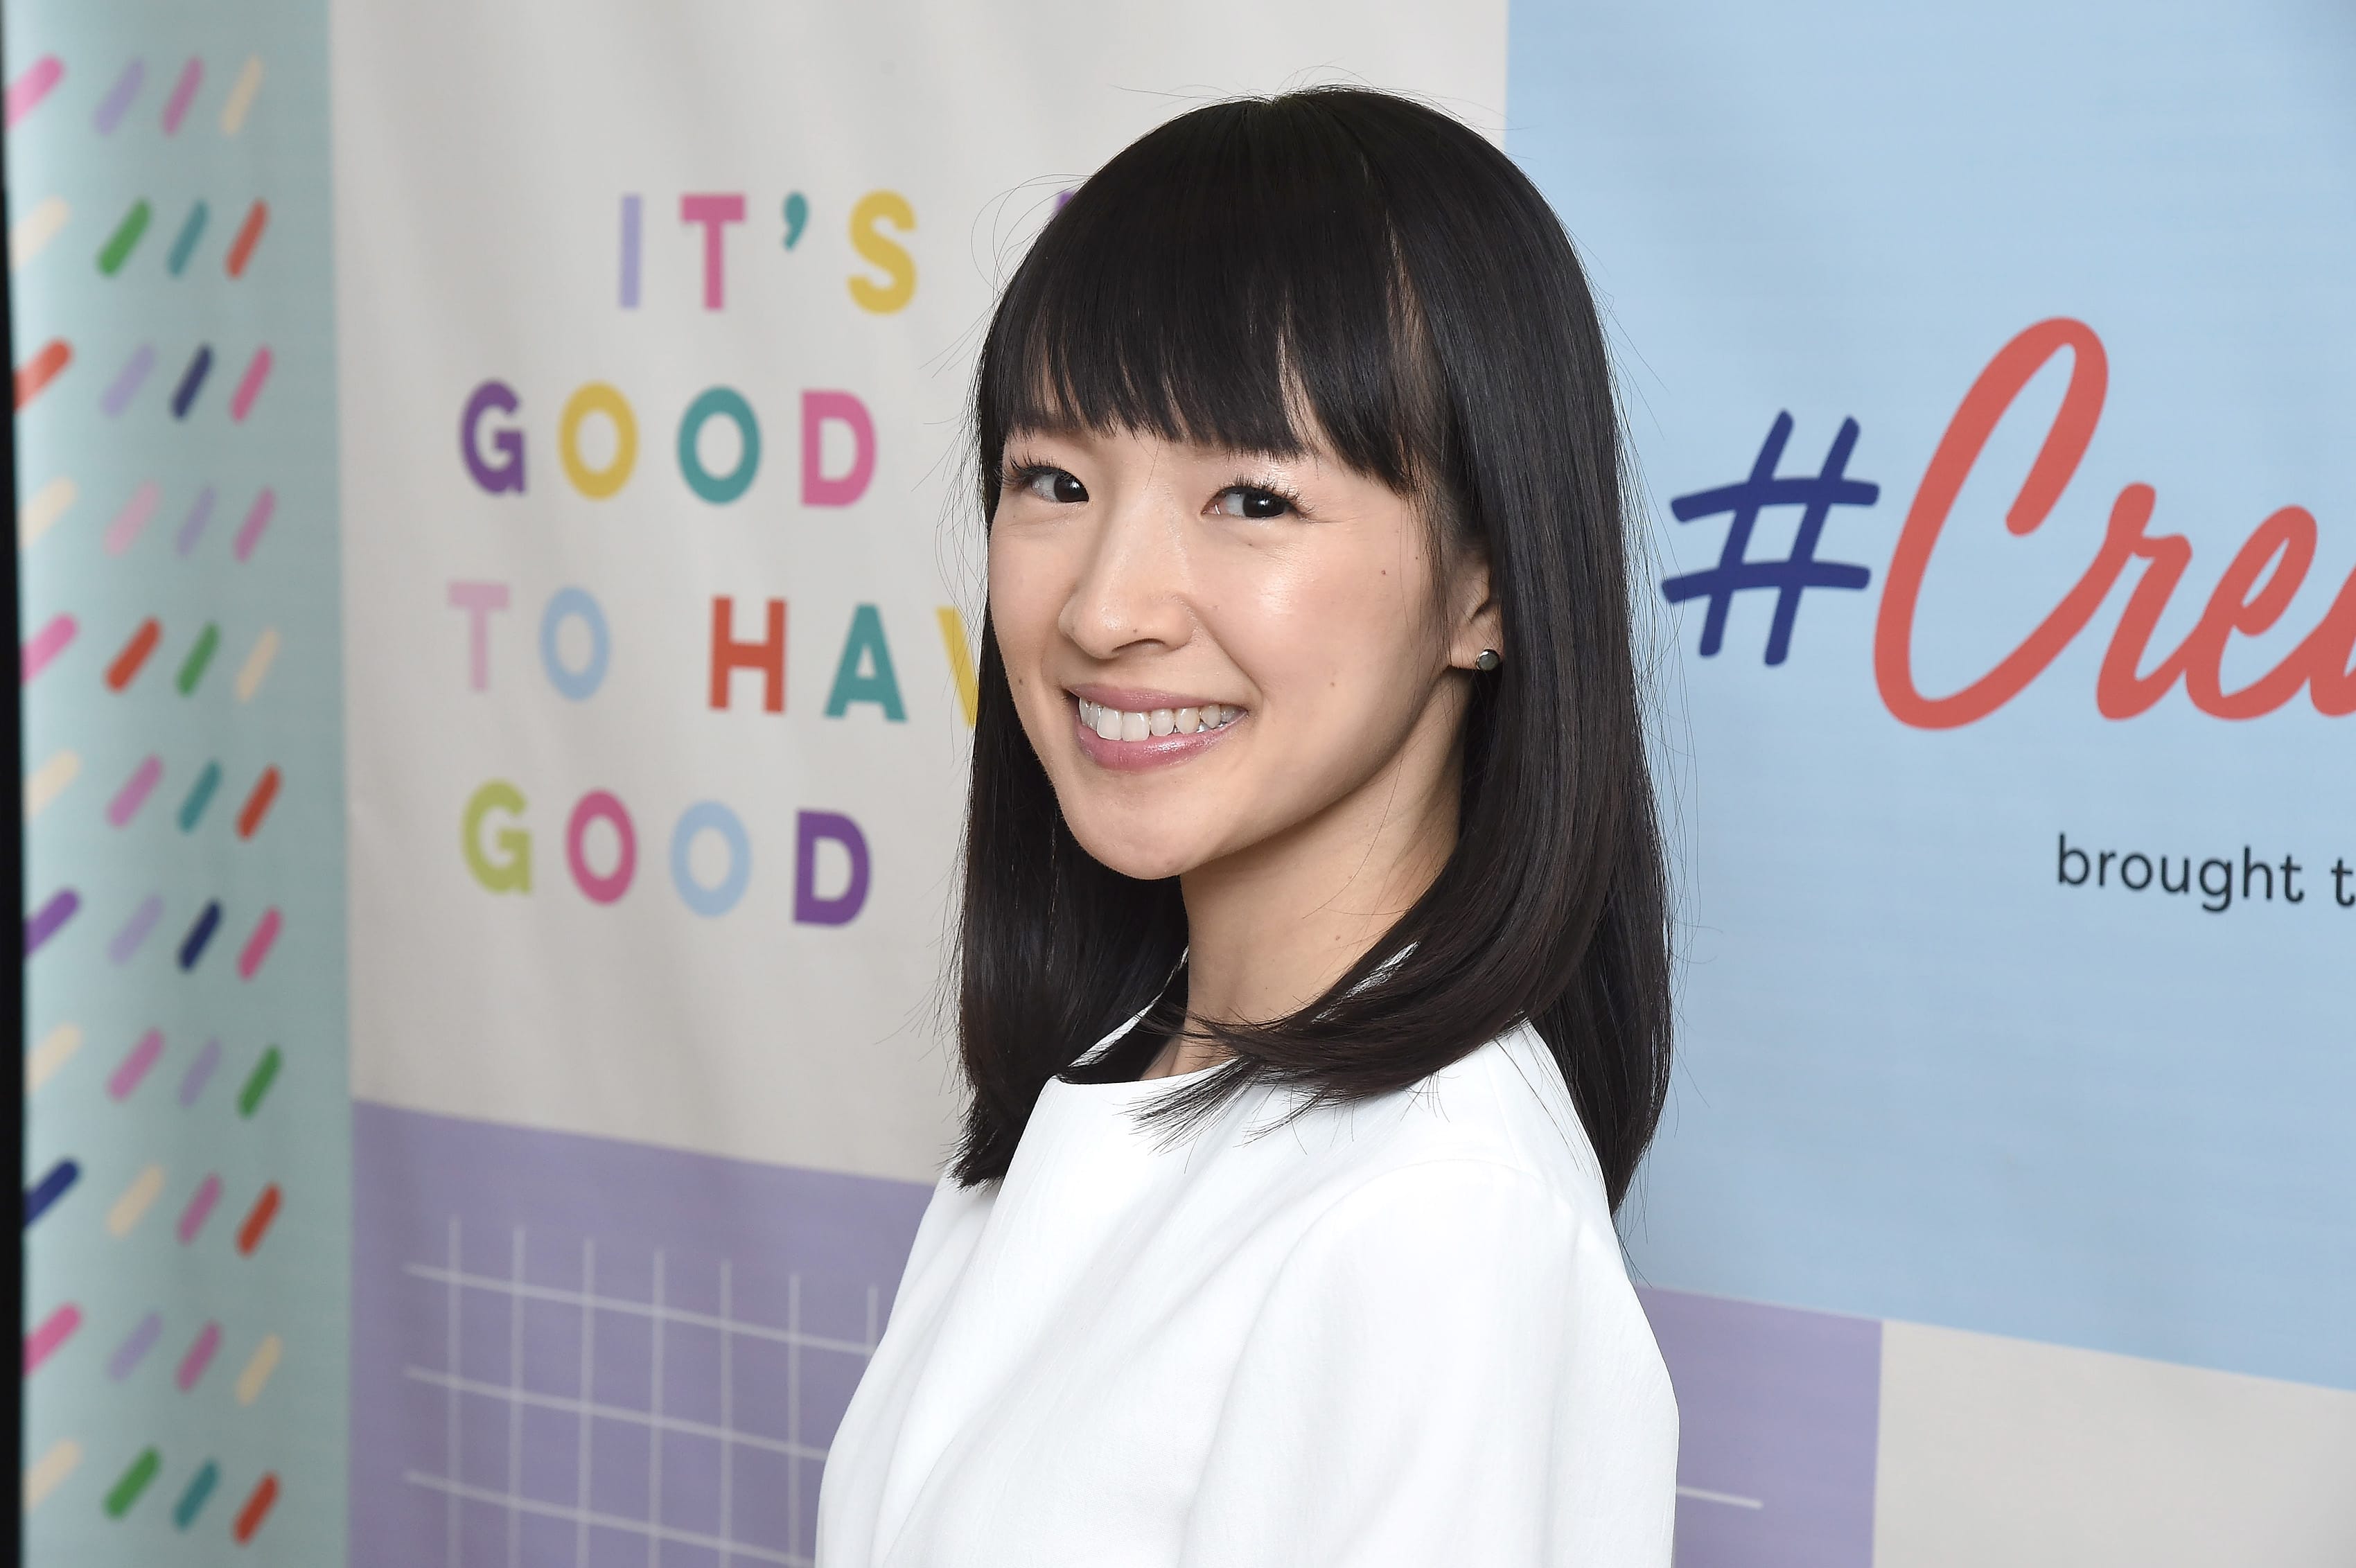 3 ways the Marie Kondo method can help you spend less